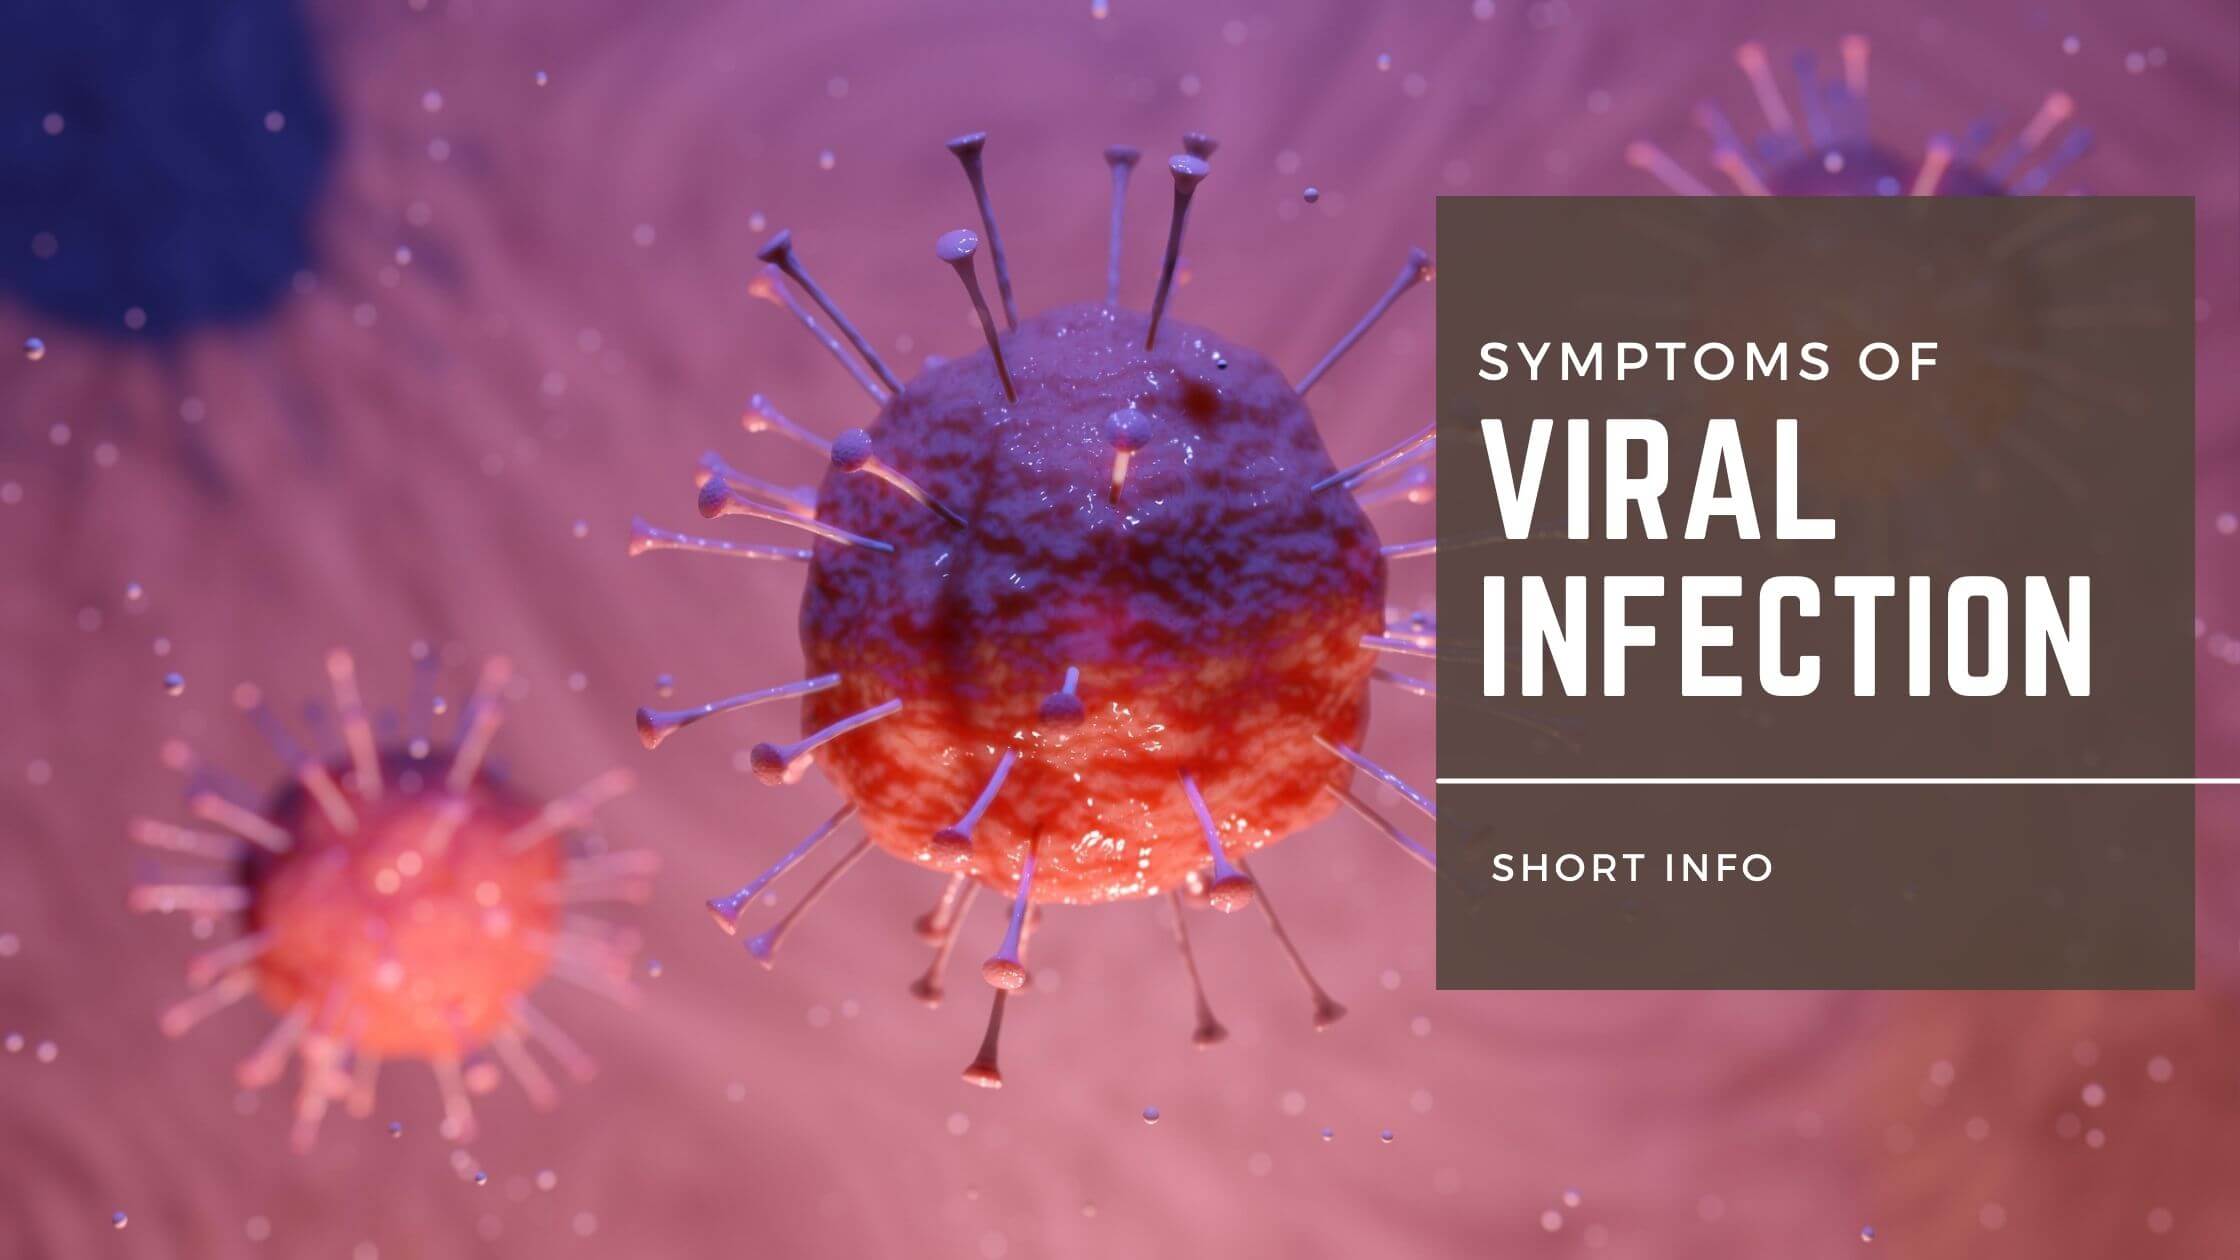 Viral Infection symptoms